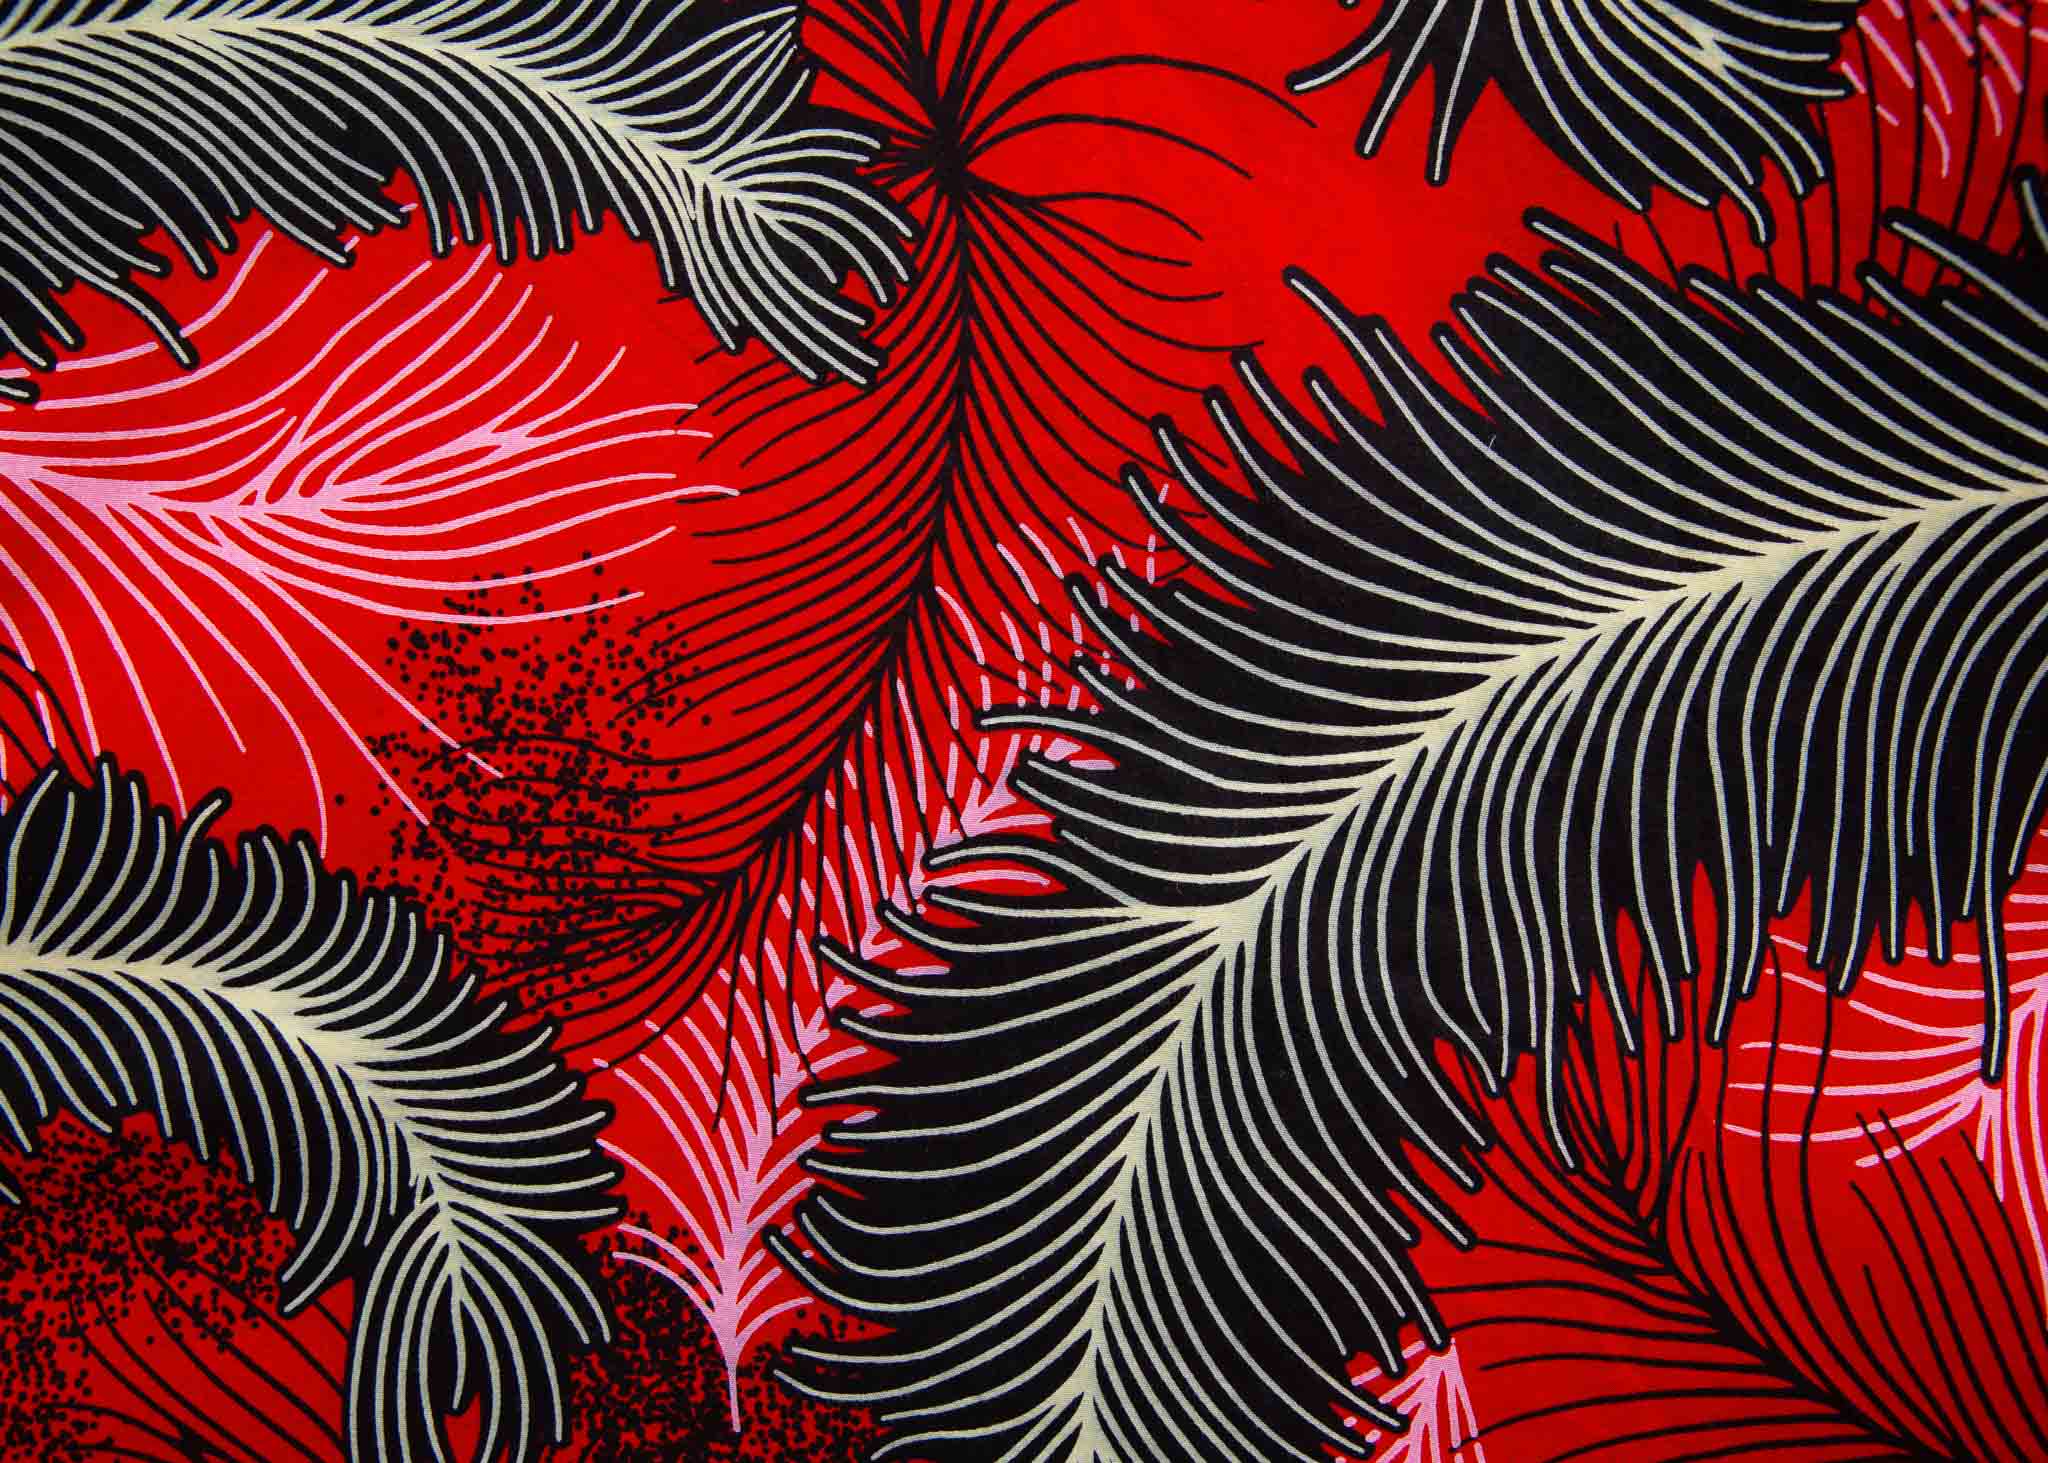 Display of red dress with black and white feather print.